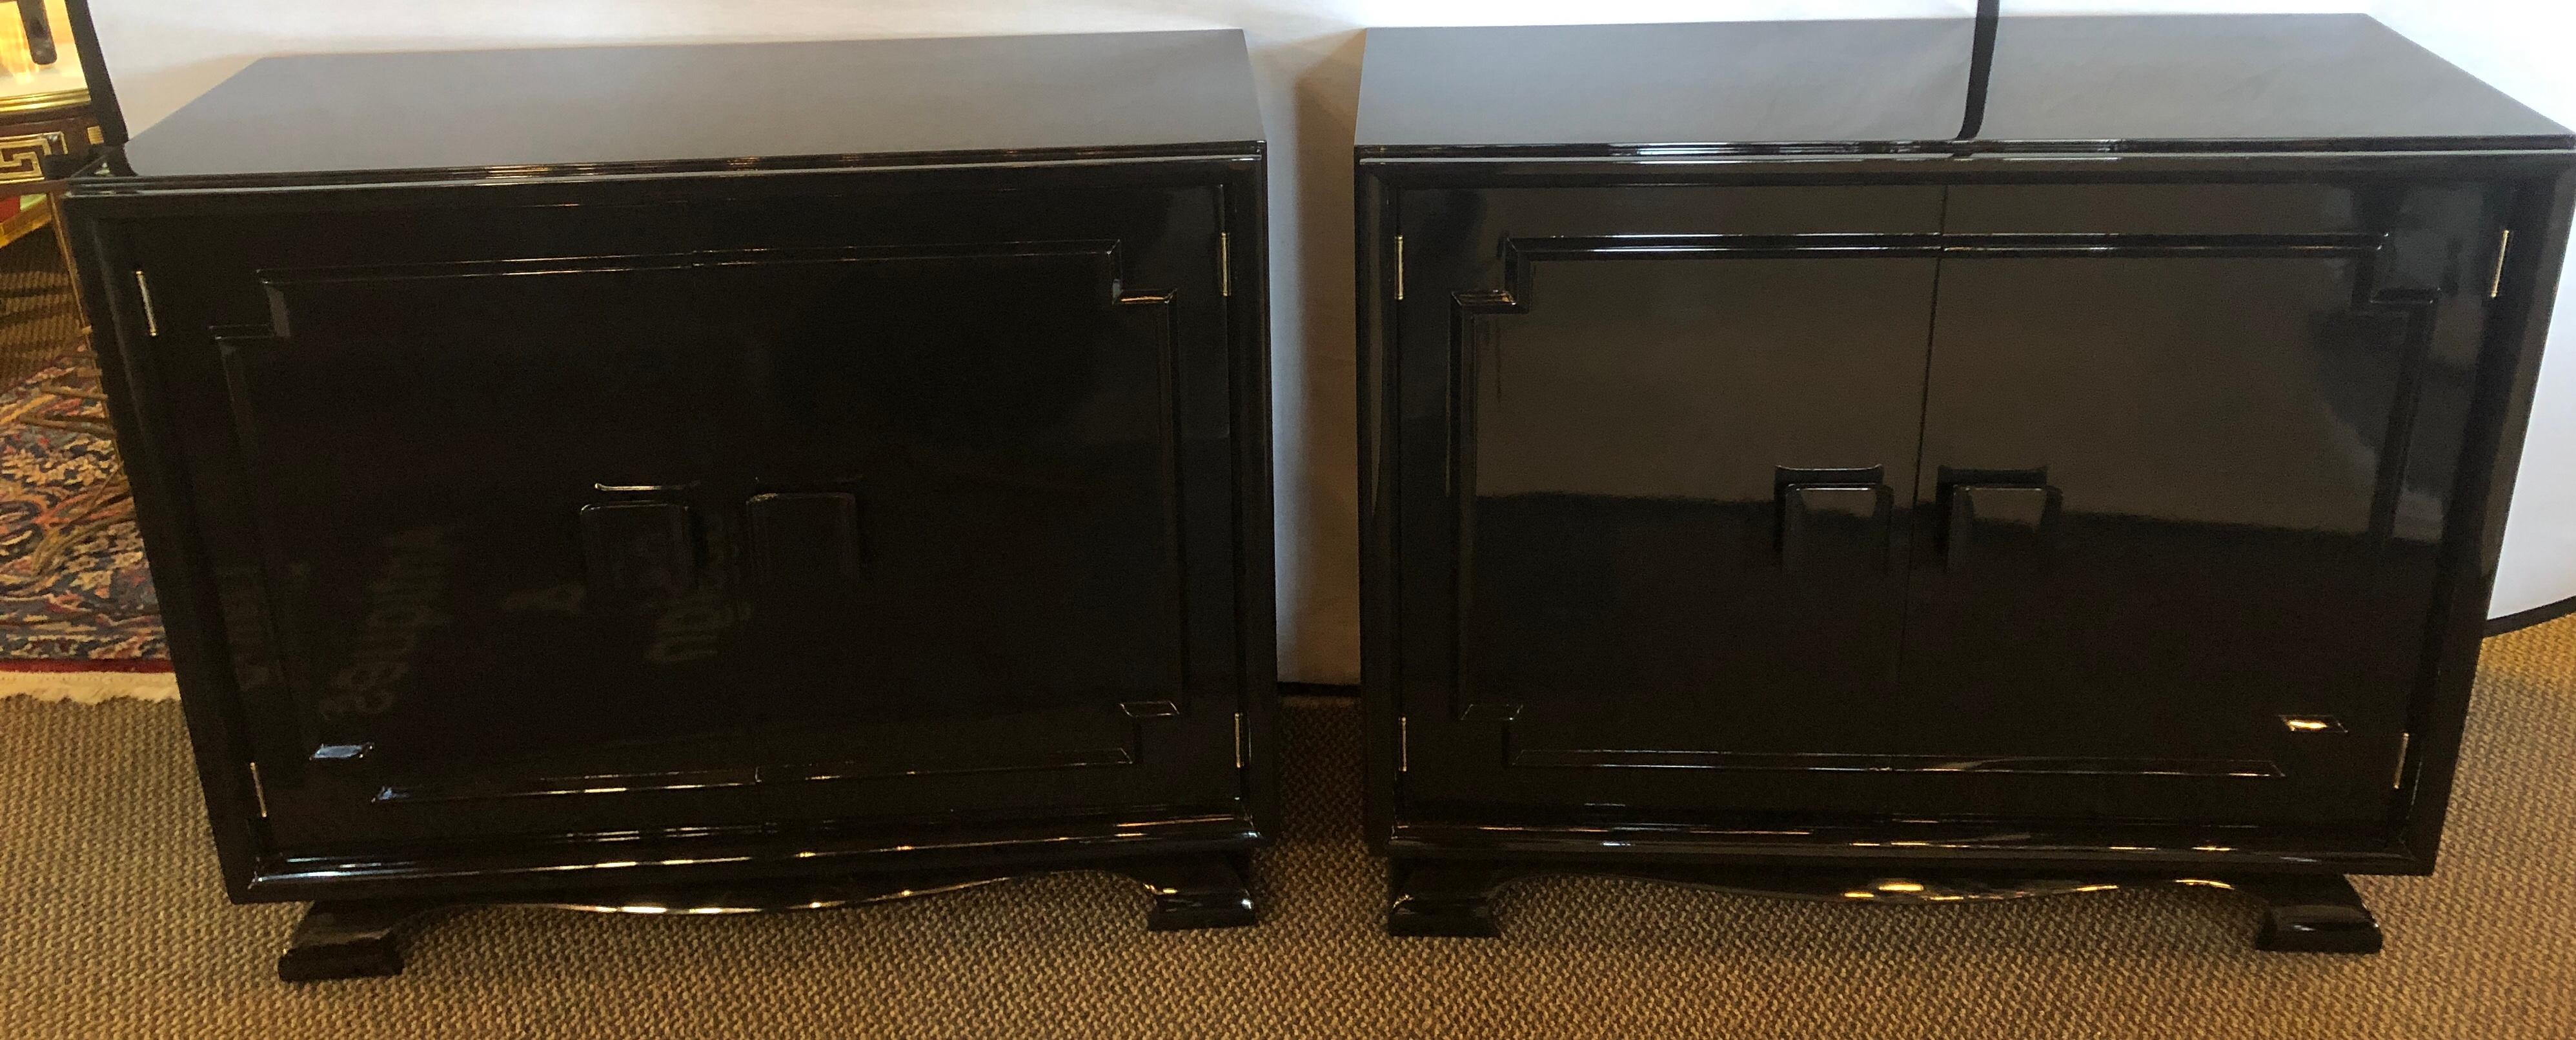 Pair of modernist Asian inspired ebony bachelor chests in James Mont Style. This Fine recently Lacquered pair of Mid-Century Modern chests or nightstand are simply stunning and the photographs do the actual pieces no justice whatsoever. The